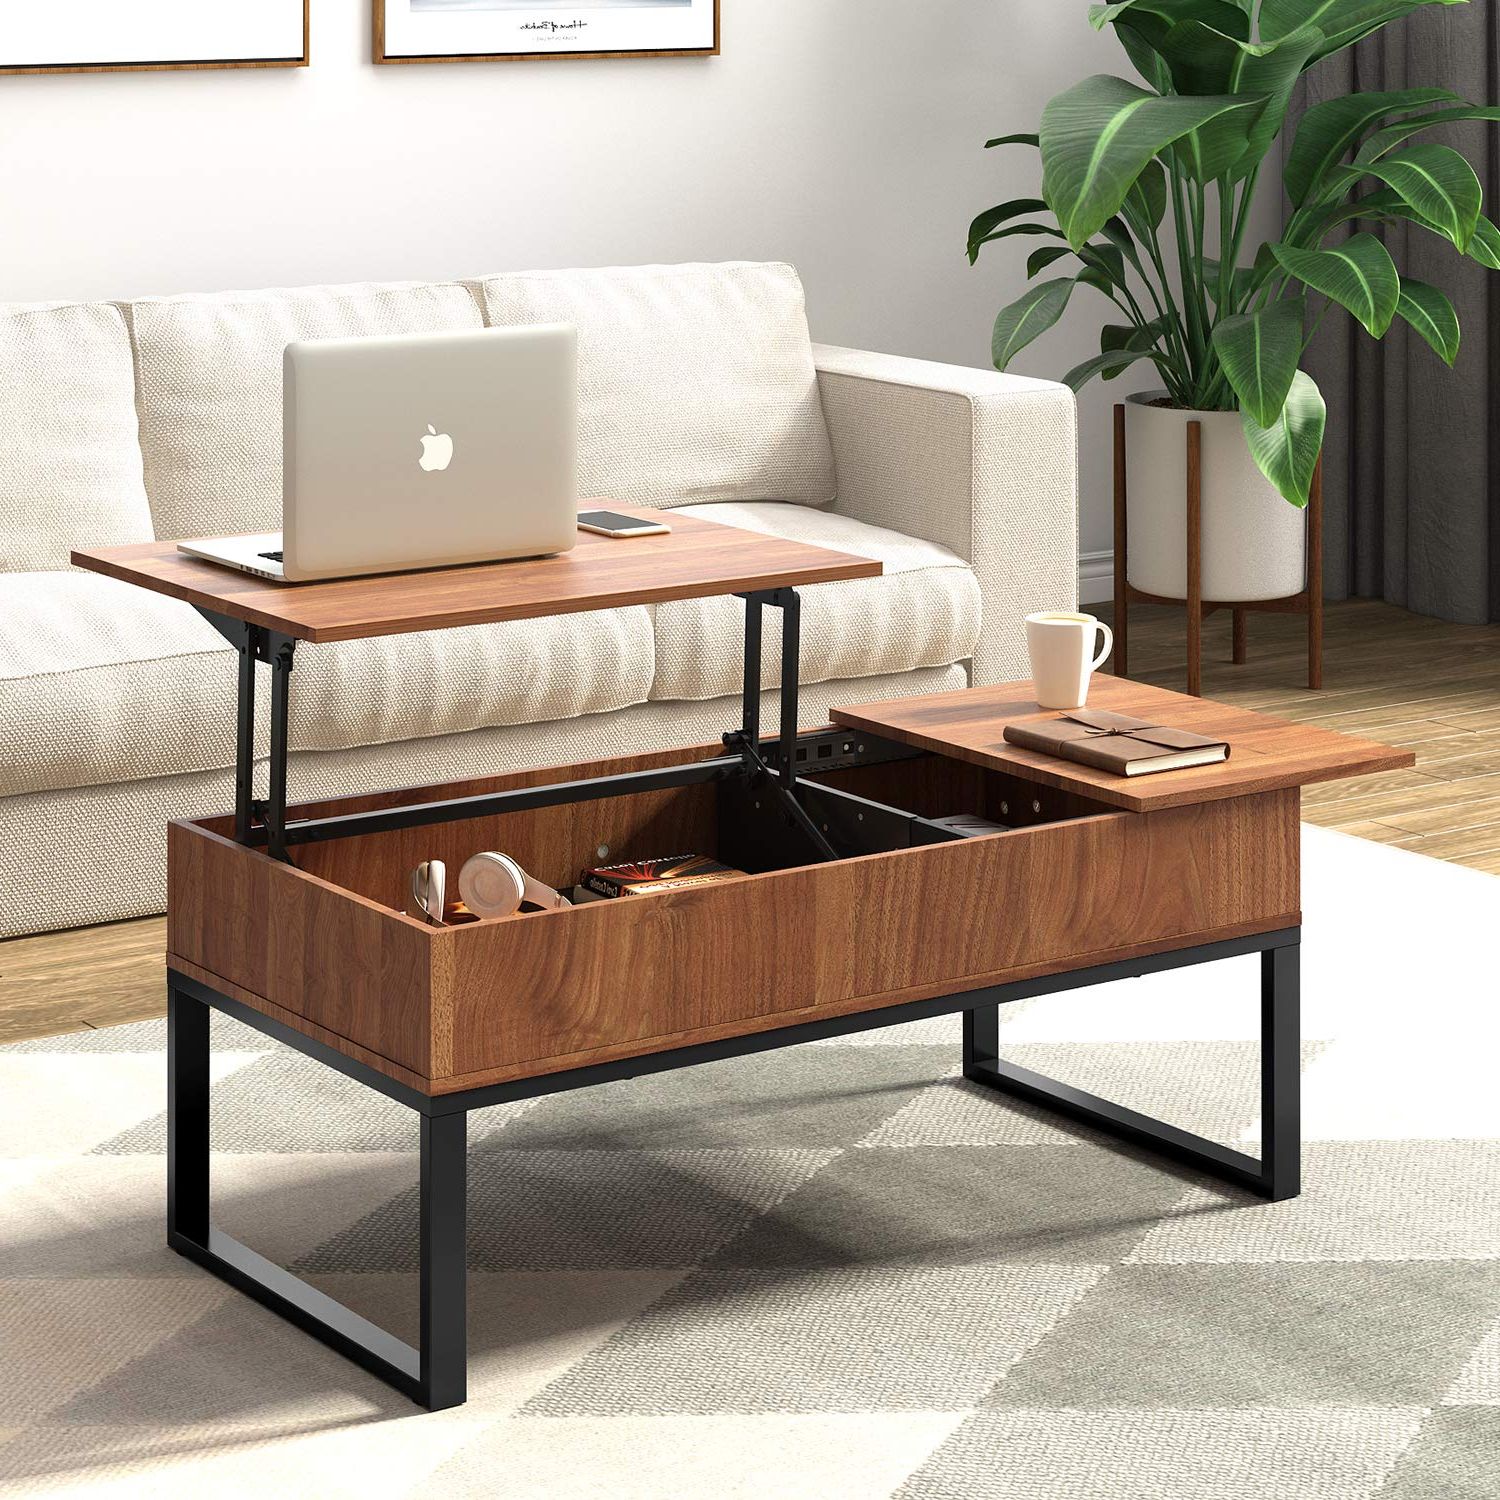 Wood Lift Top Coffee Tables Pertaining To Most Popular Wlive Wood Coffee Table With Adjustable Lift Top Table, Metal Frame (View 8 of 15)